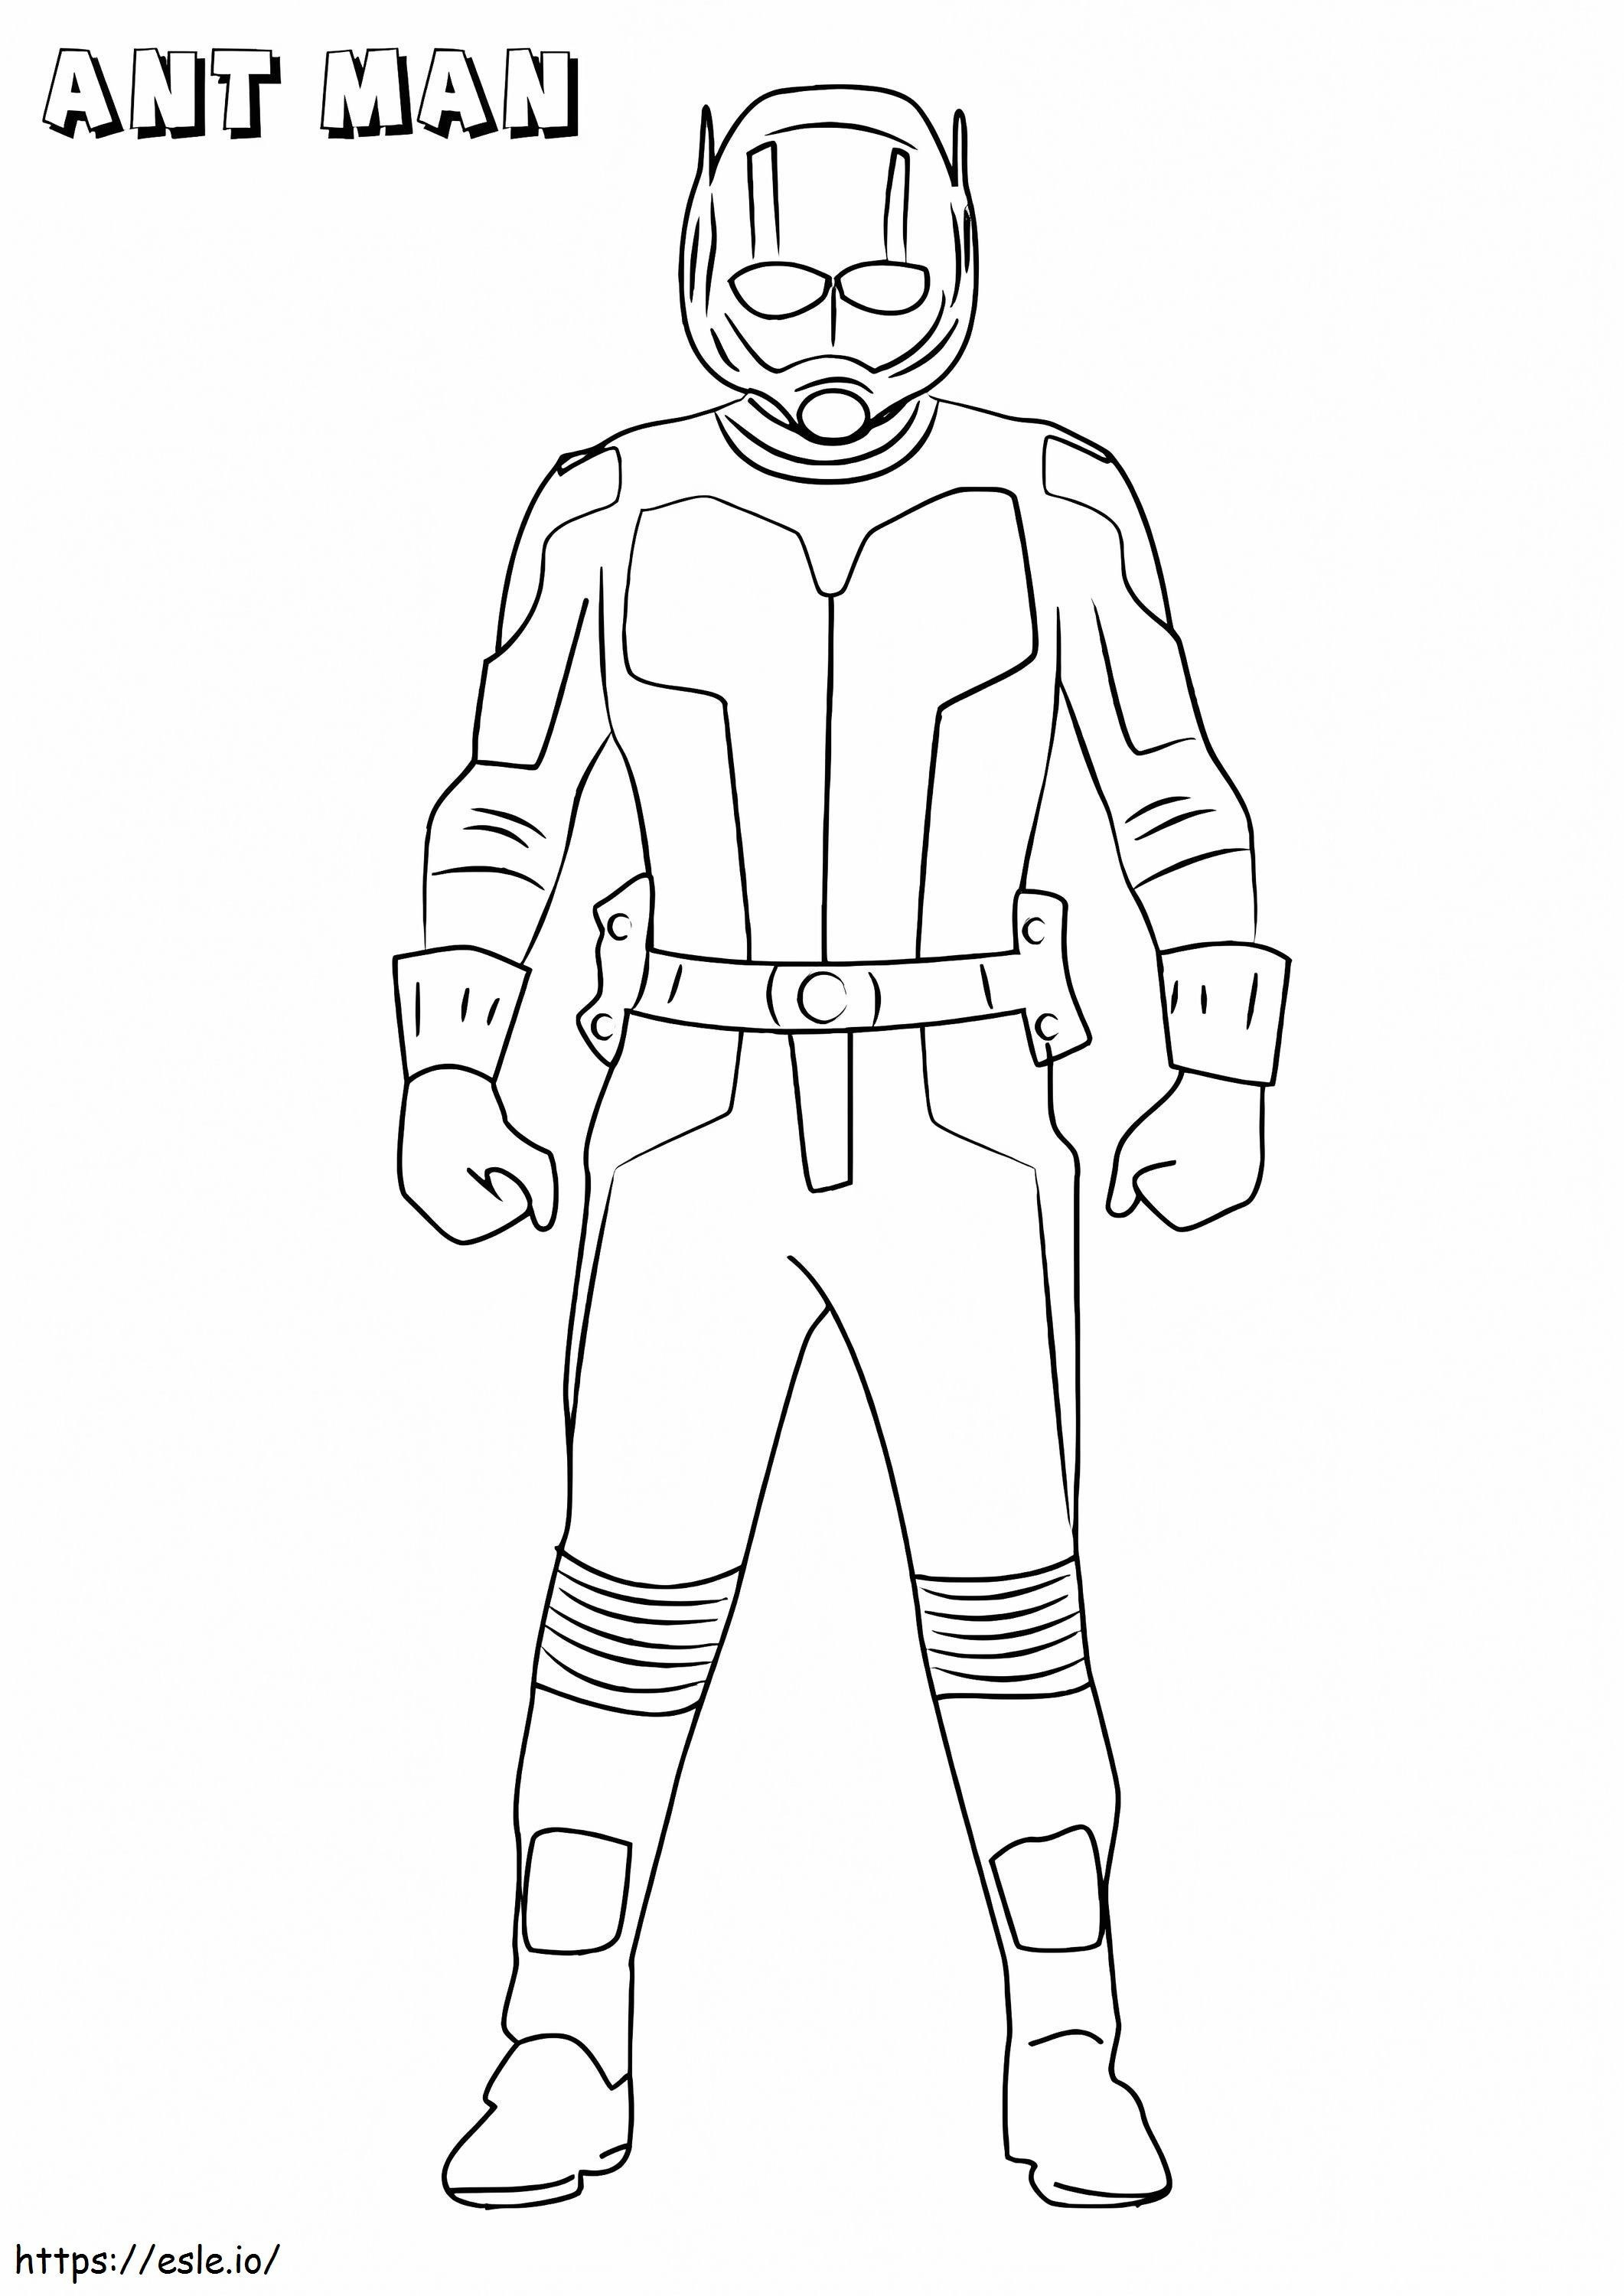 Free Ant Man coloring page